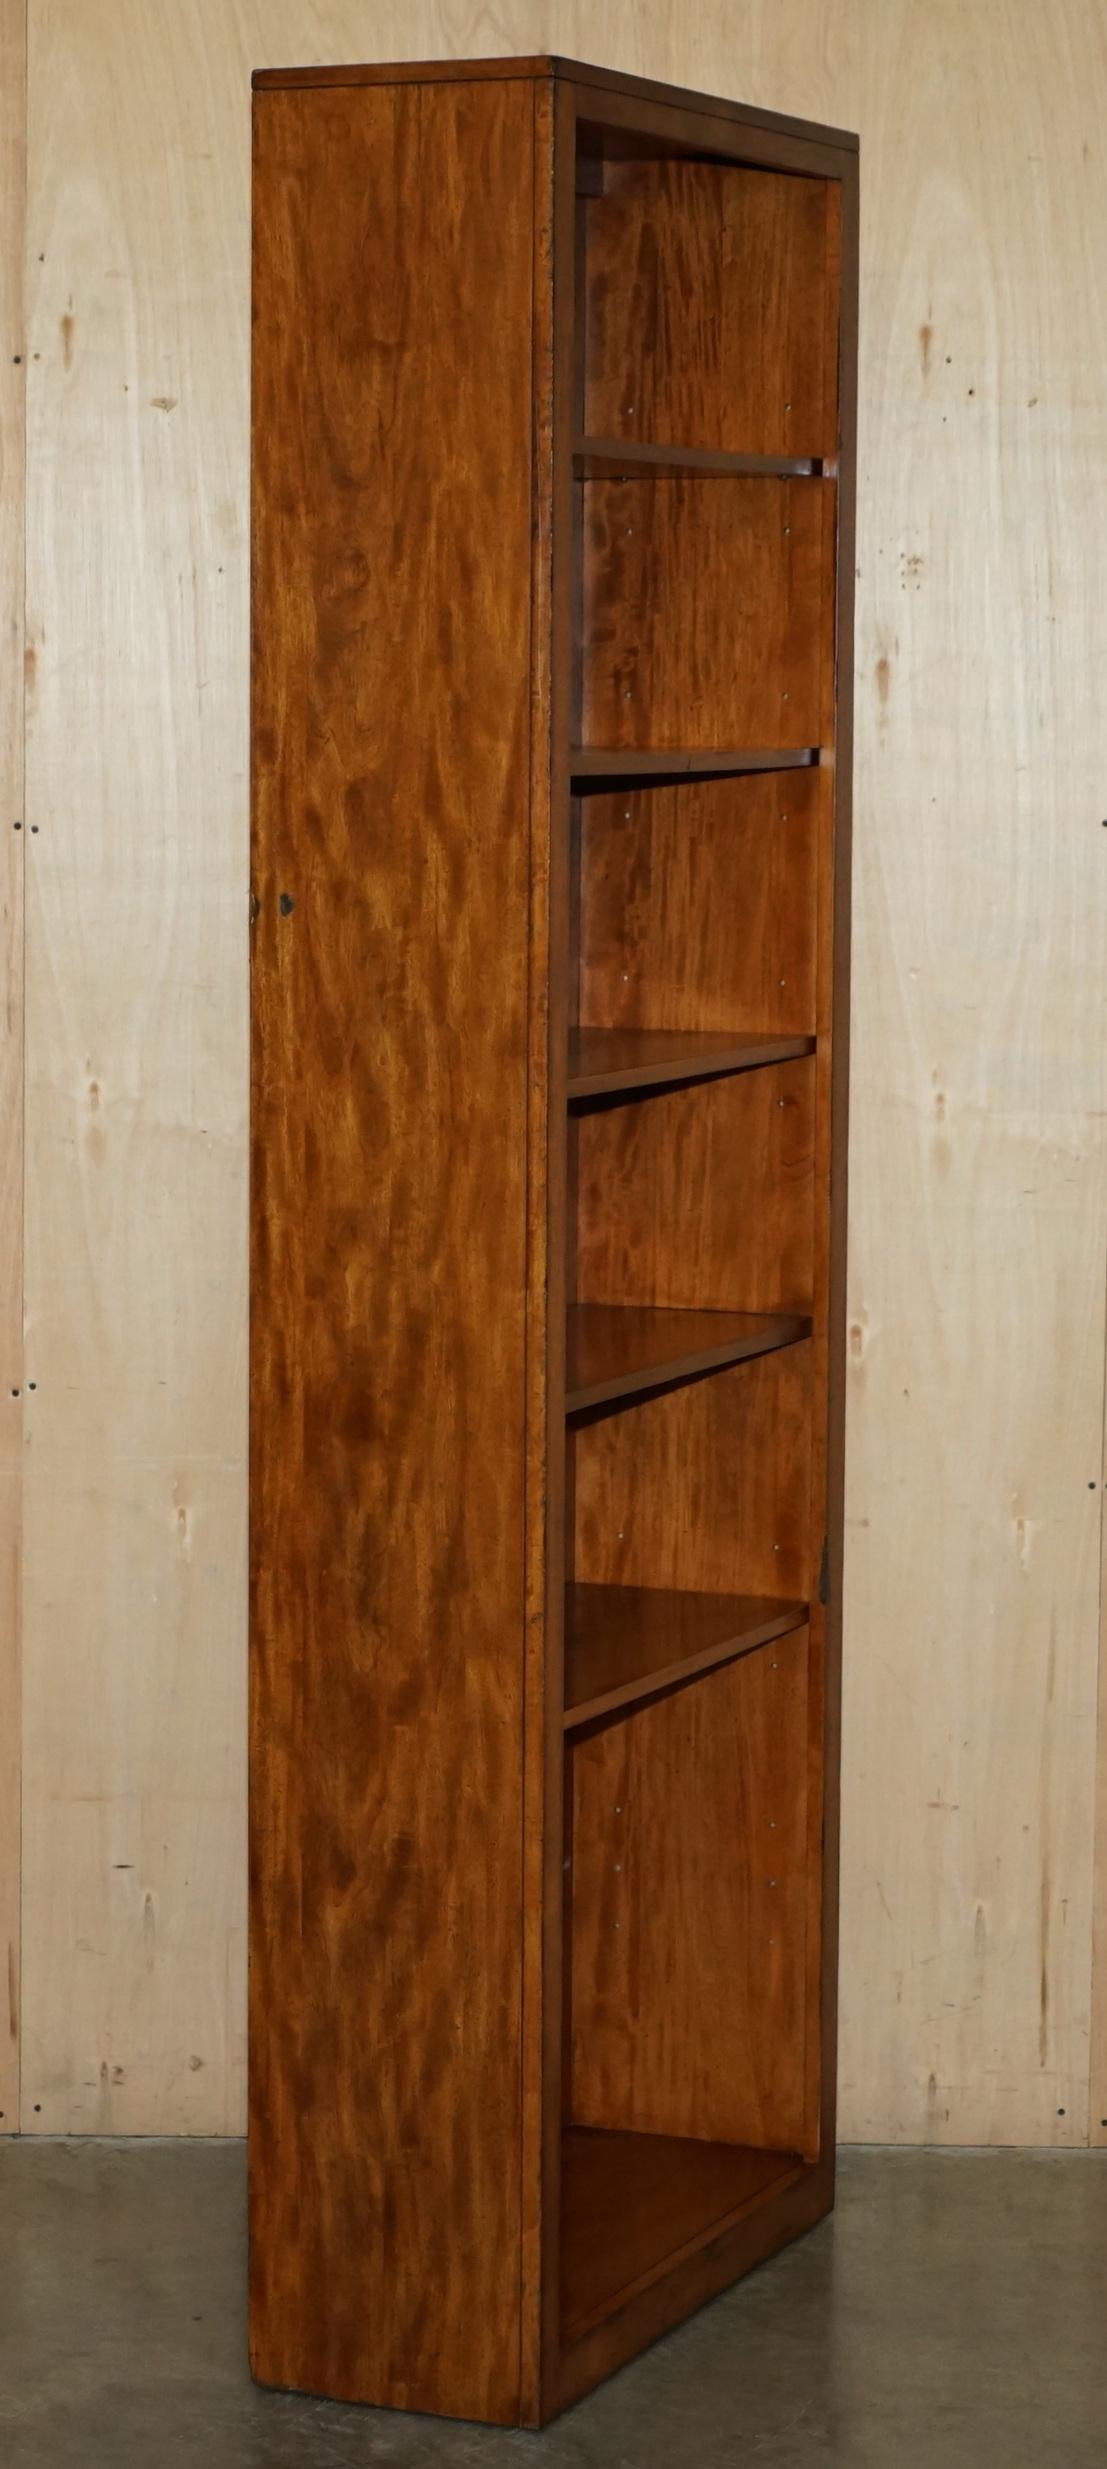 PAIR OF HARDWOOD FINISH TALL OPEN LIBRARY BOOKCASES BY THE DESiGNER ETHAN ALLEN 11